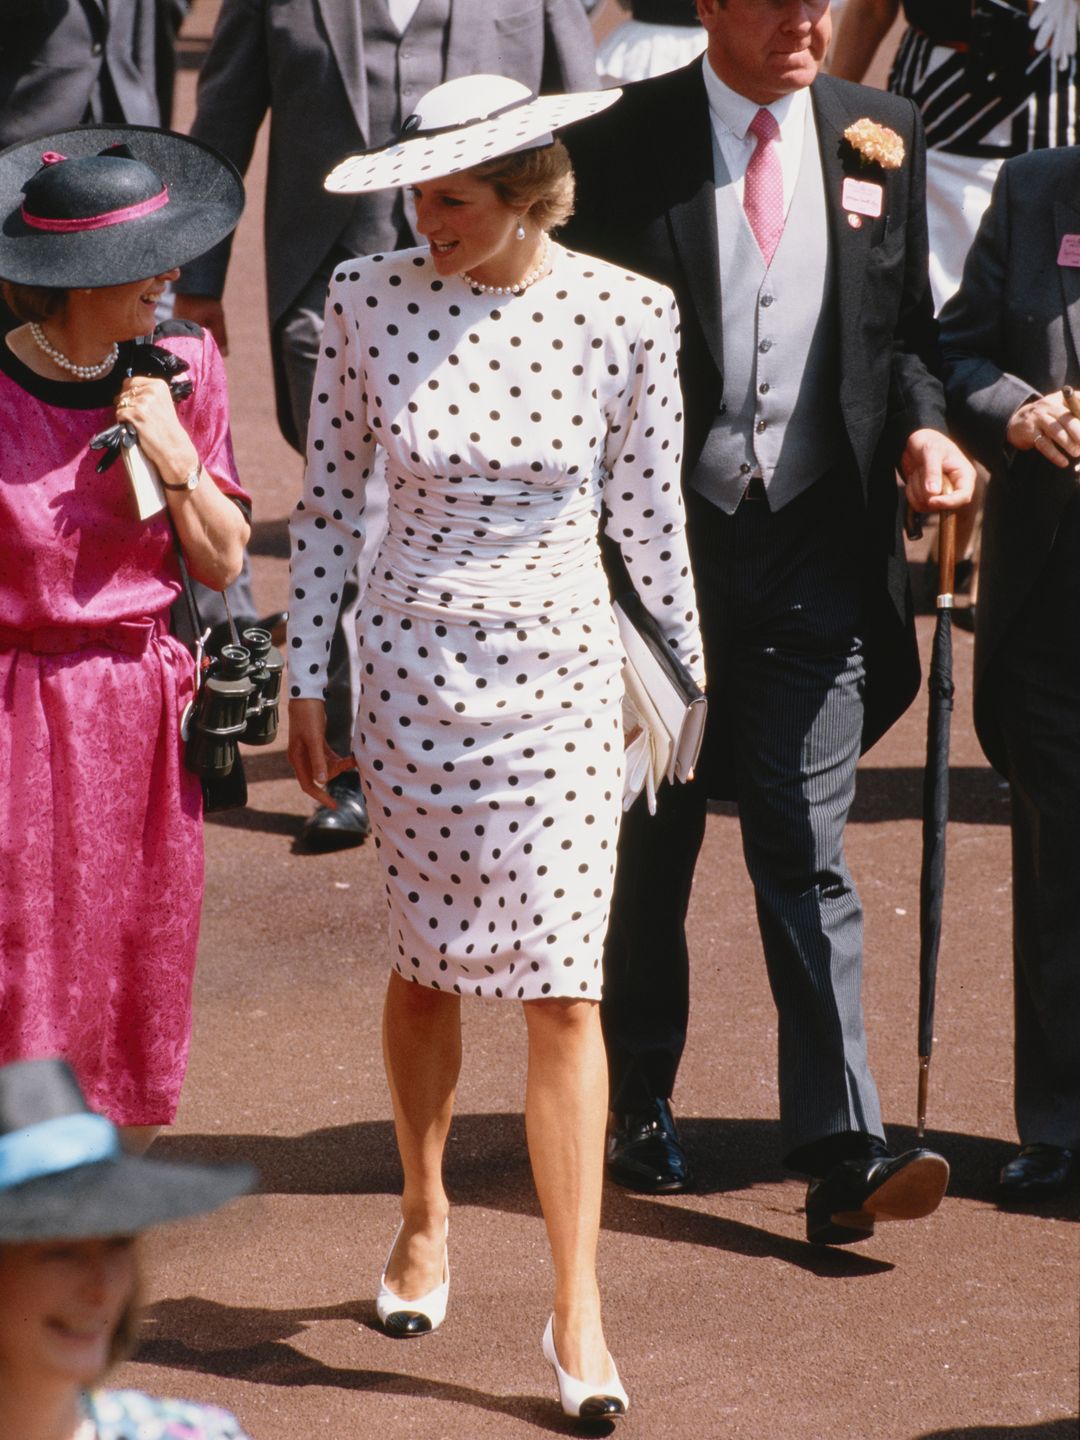 Diana, Princess of Wales, attends the Ascot race meeting in England in June 1988 wearing a black and white spotted dress designed by Victor Edelstein and a hat by Philip Somerville.  